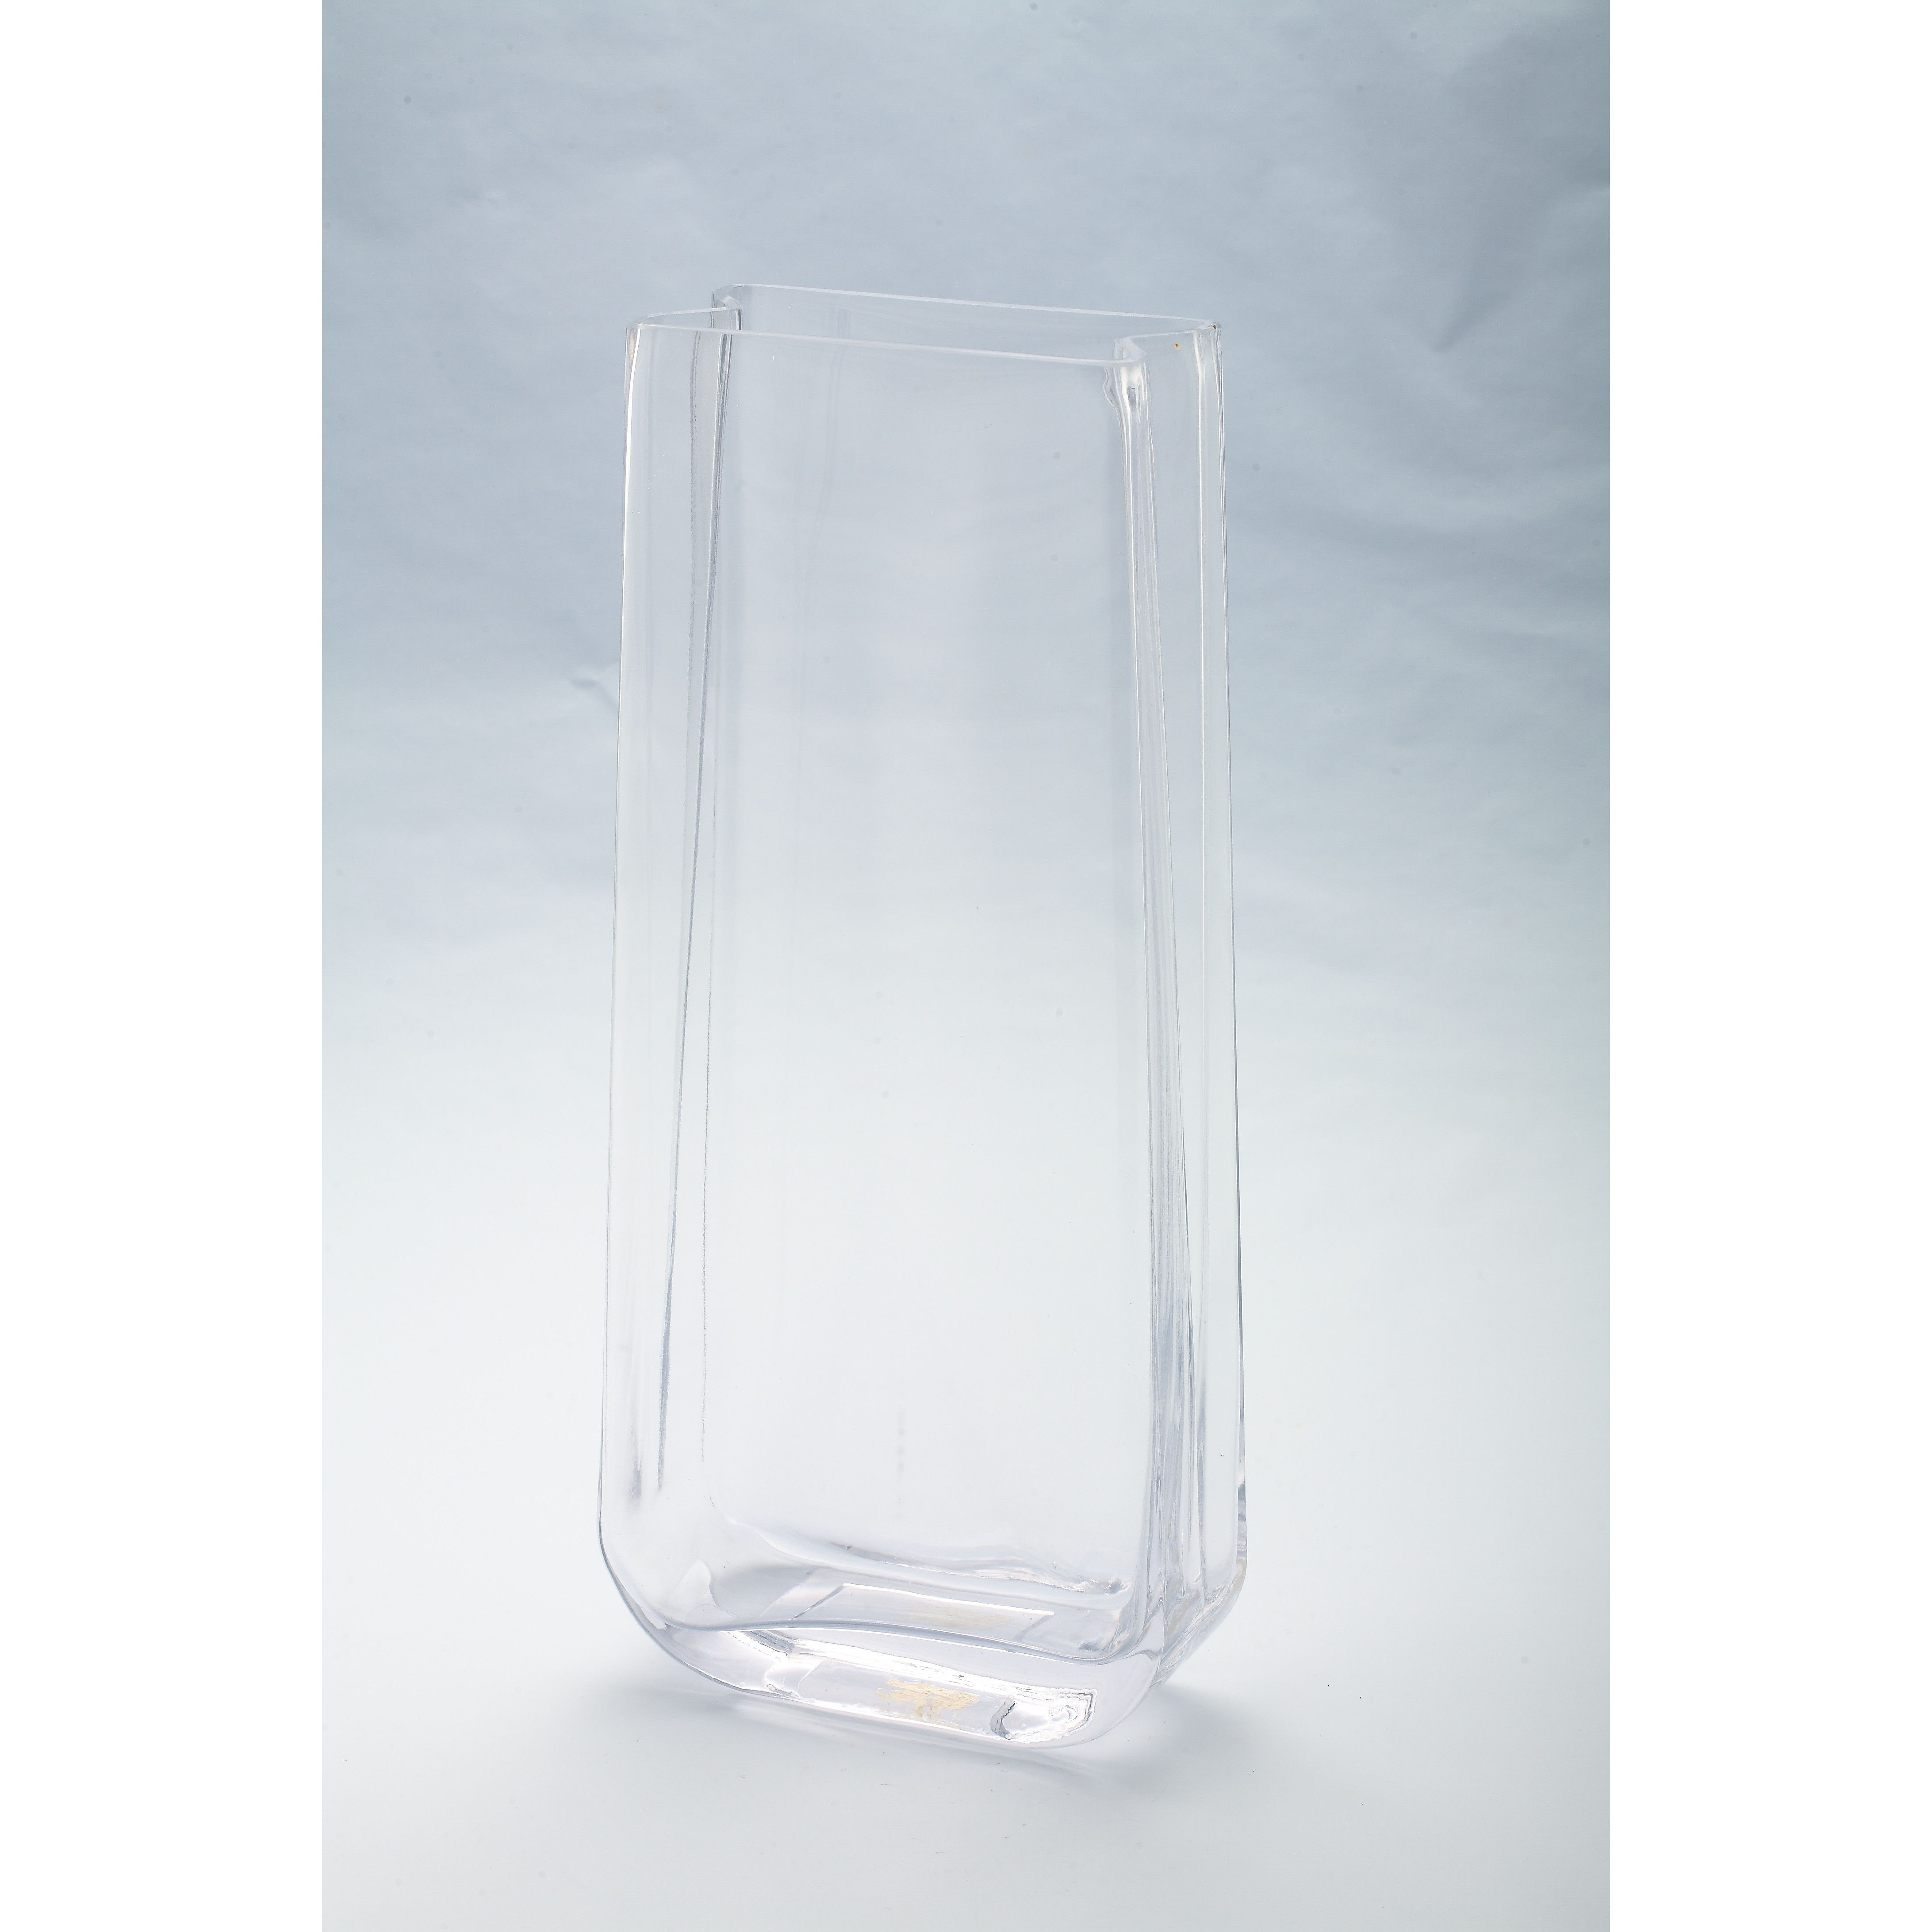 12 Recommended Marquis by Waterford Vase 2024 free download marquis by waterford vase of rent glass vases image diamond star glass vase wedding rental ideas in diamond star glass vase wedding rental ideas pinterest